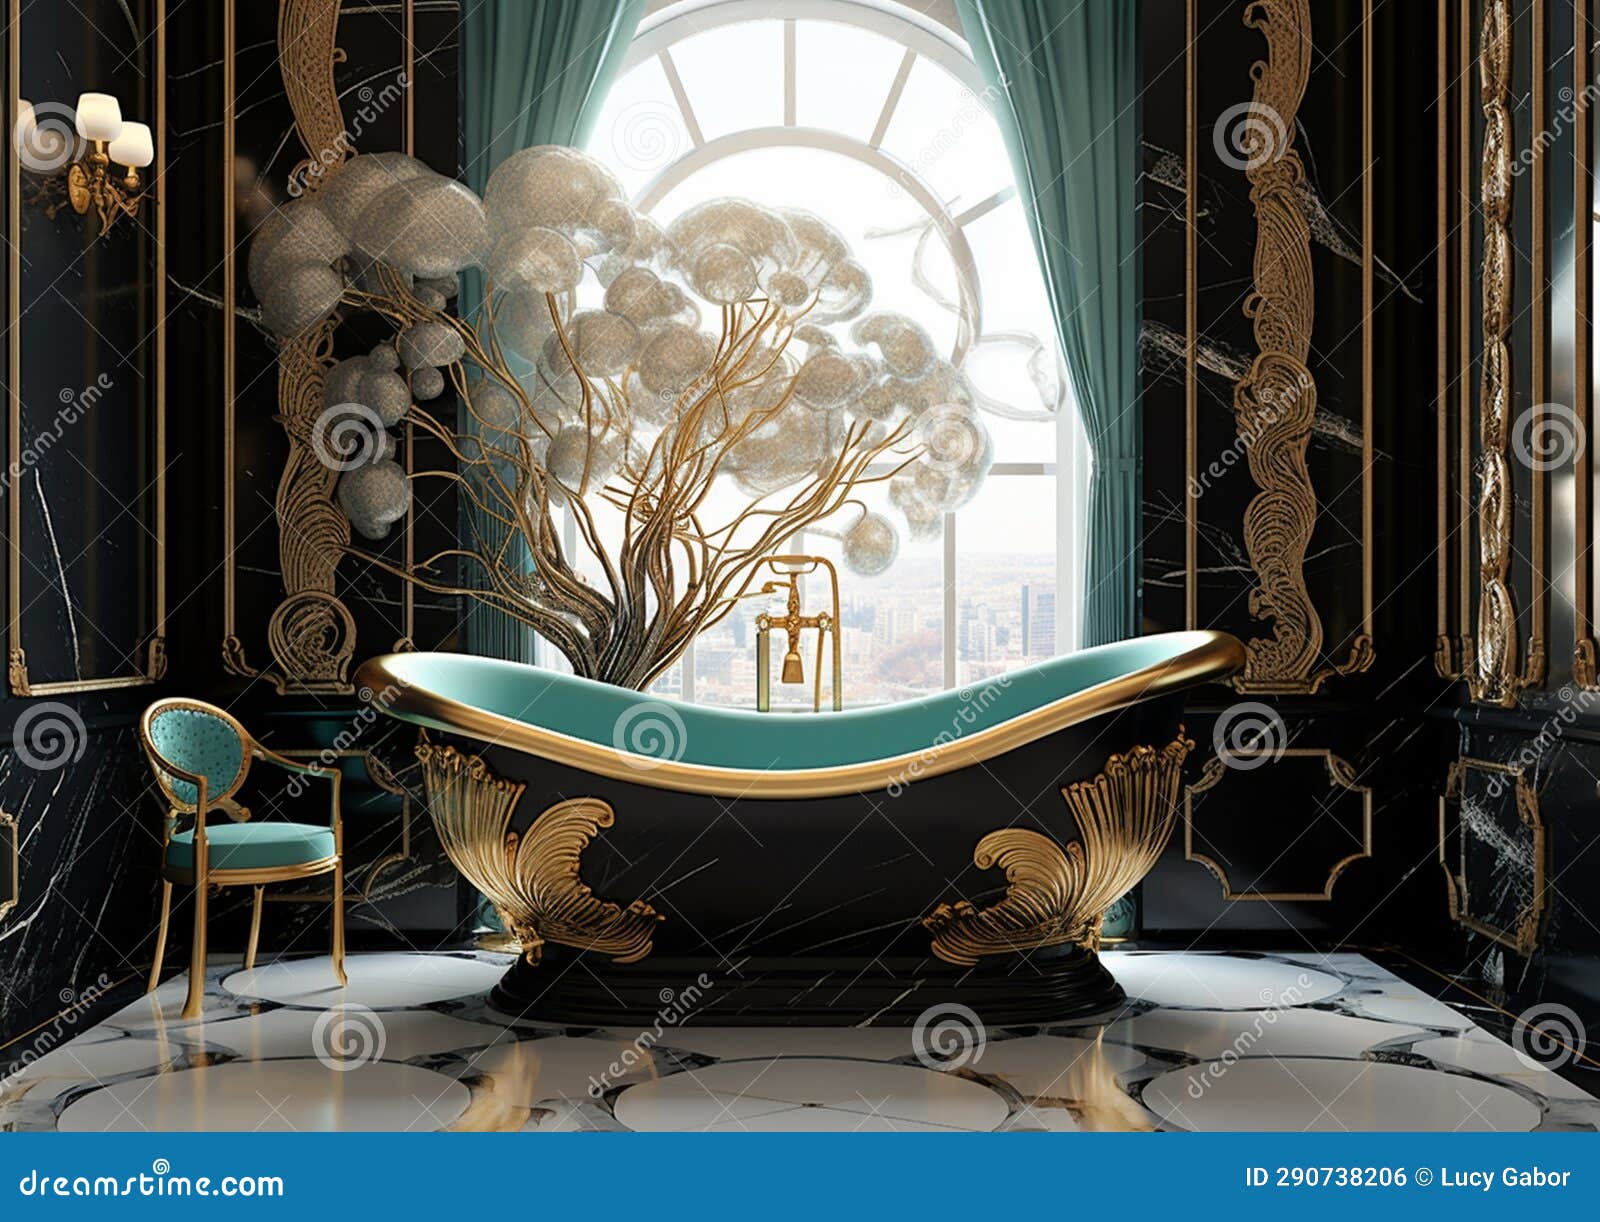 Stylish Art Nouveau Luxury Bathroom in Black, White, Gold and Turquoise ...